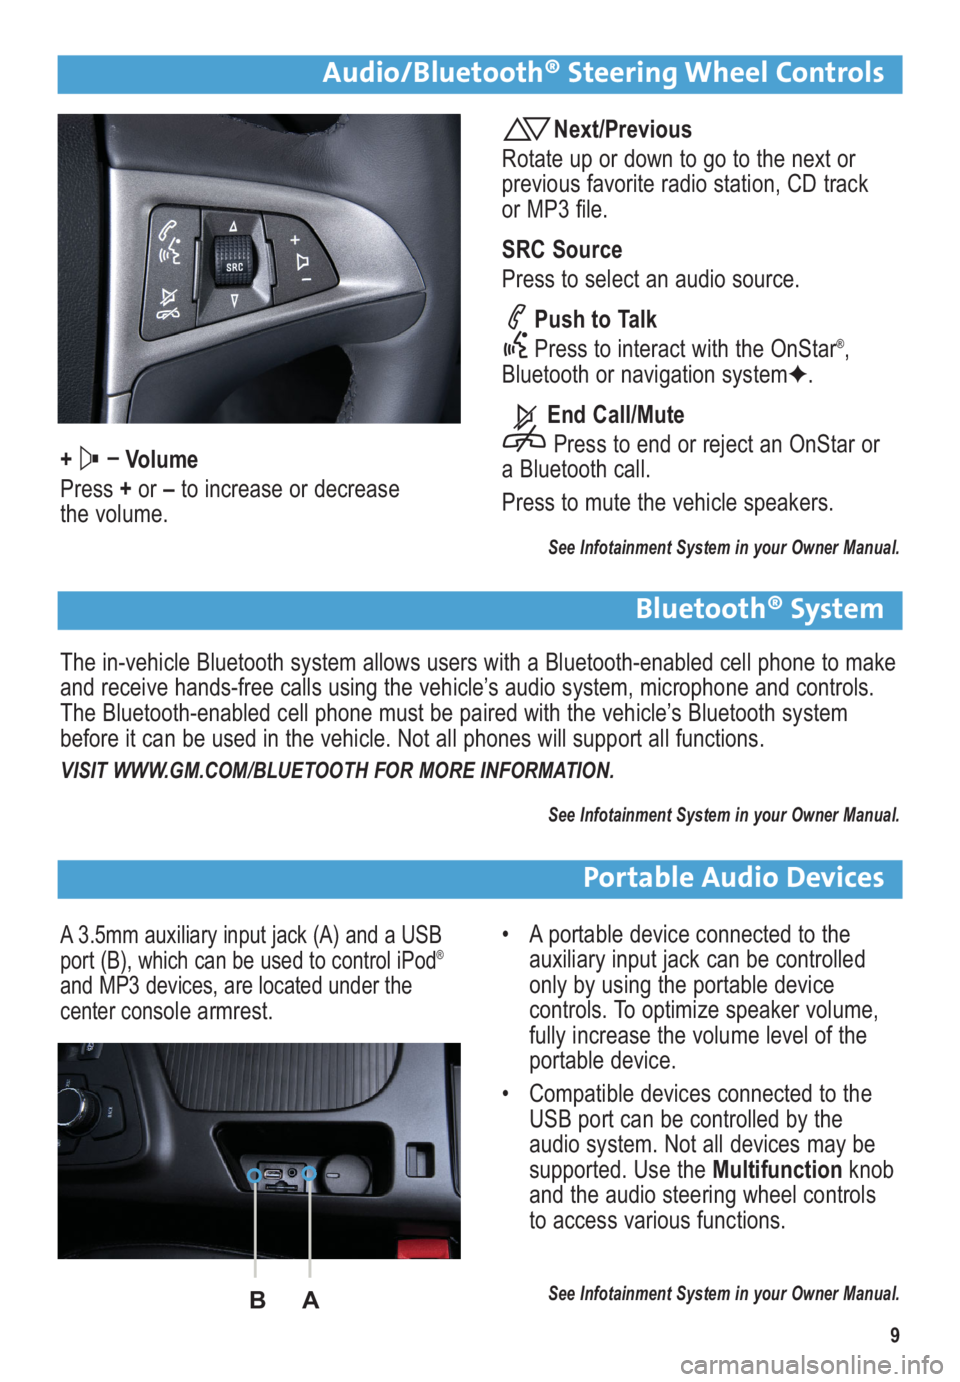 BUICK REGAL 2012  Get To Know Guide 9
Audio/Bluetooth® Steering Wheel Controls
+ –
Volume
Press +or –to increase or decrease
the volume.
Next/Previous
Rotate up or down to go to the next or 
previous favorite radio station, CD trac